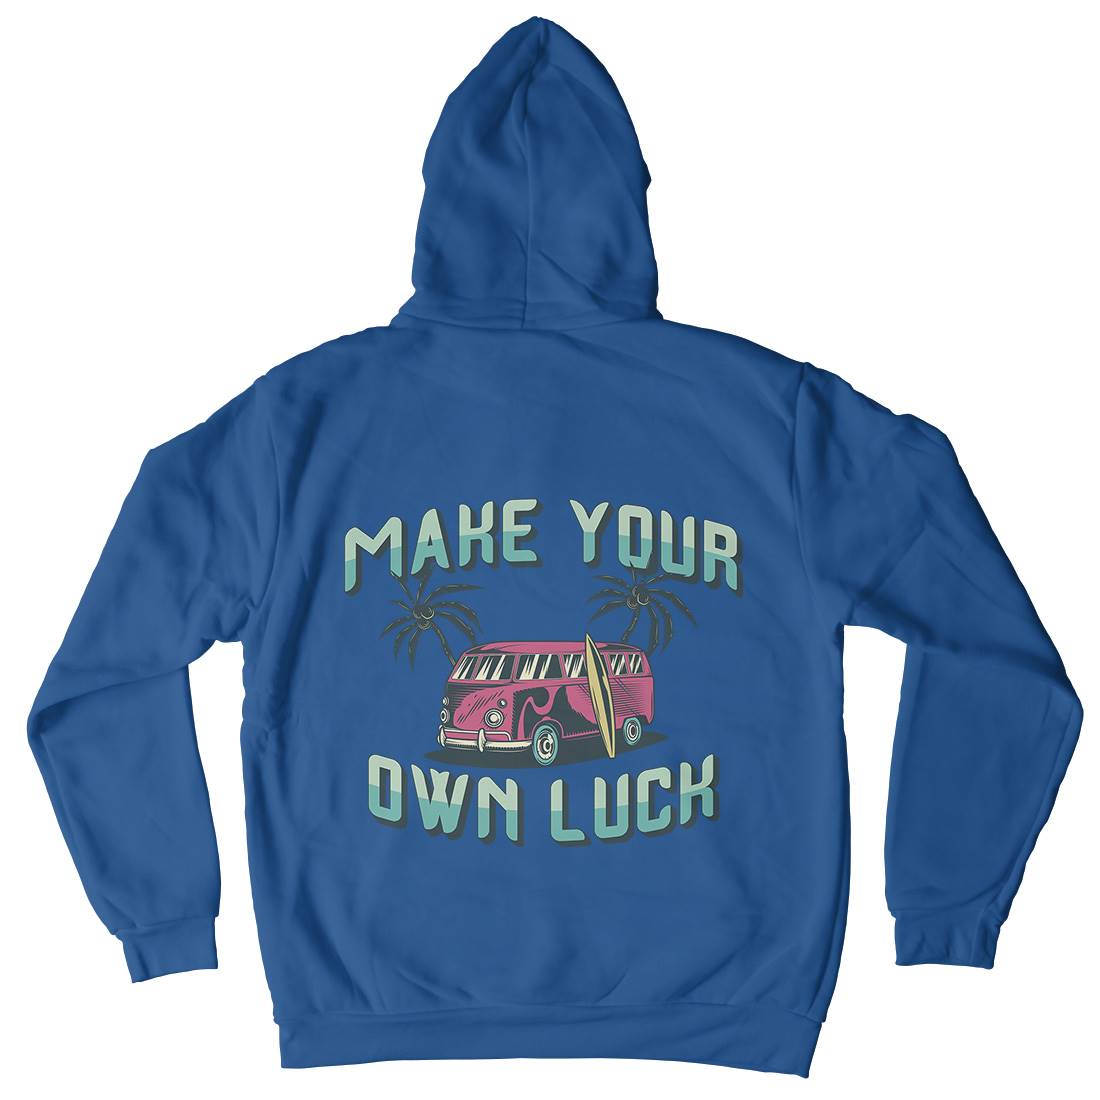 Make Your Own Luck Kids Crew Neck Hoodie Nature B307